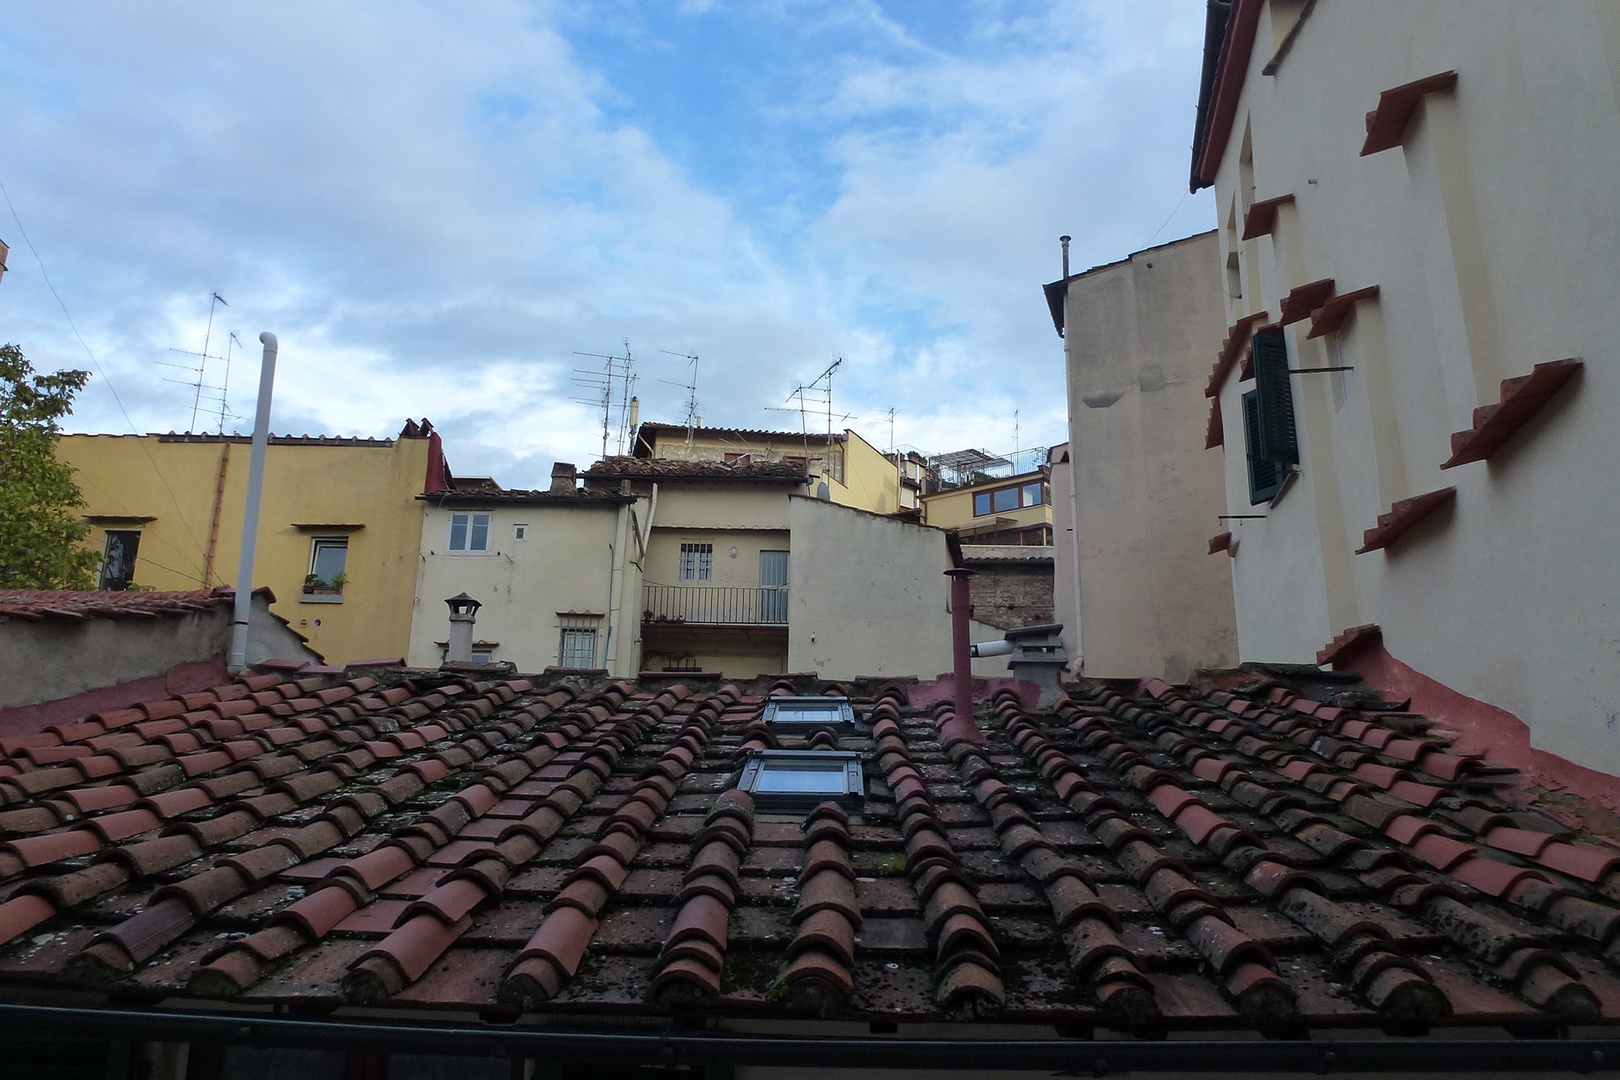 Timeless view over terracotta rooftops